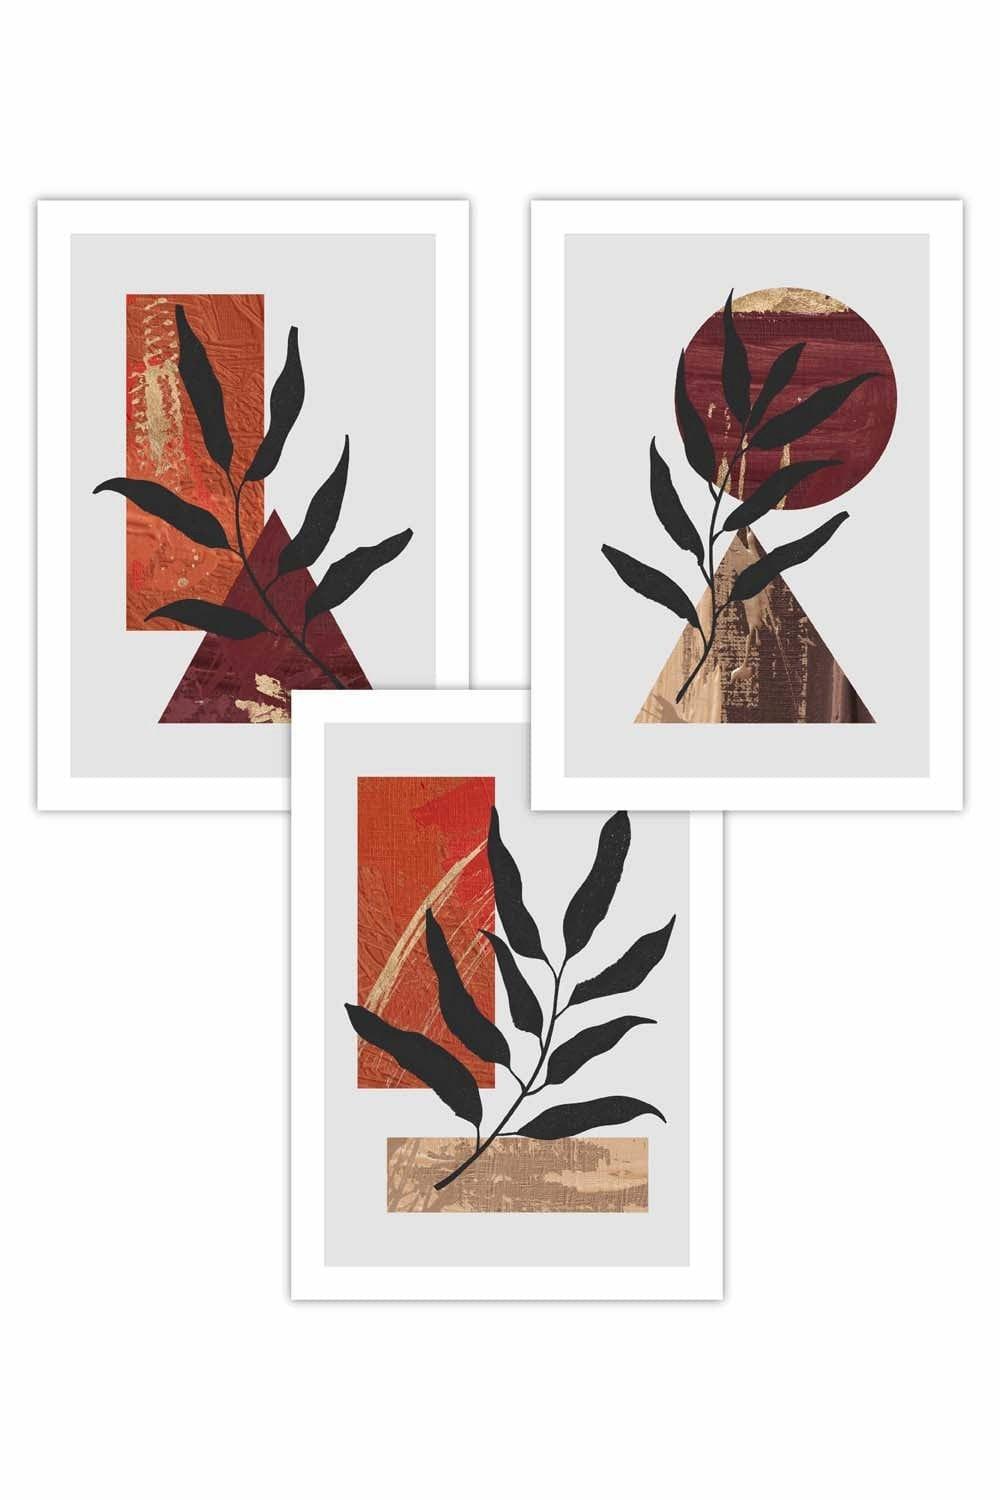 Set of 3 Abstract Textured Geometric Art in Red Orange and Gold Art Posters